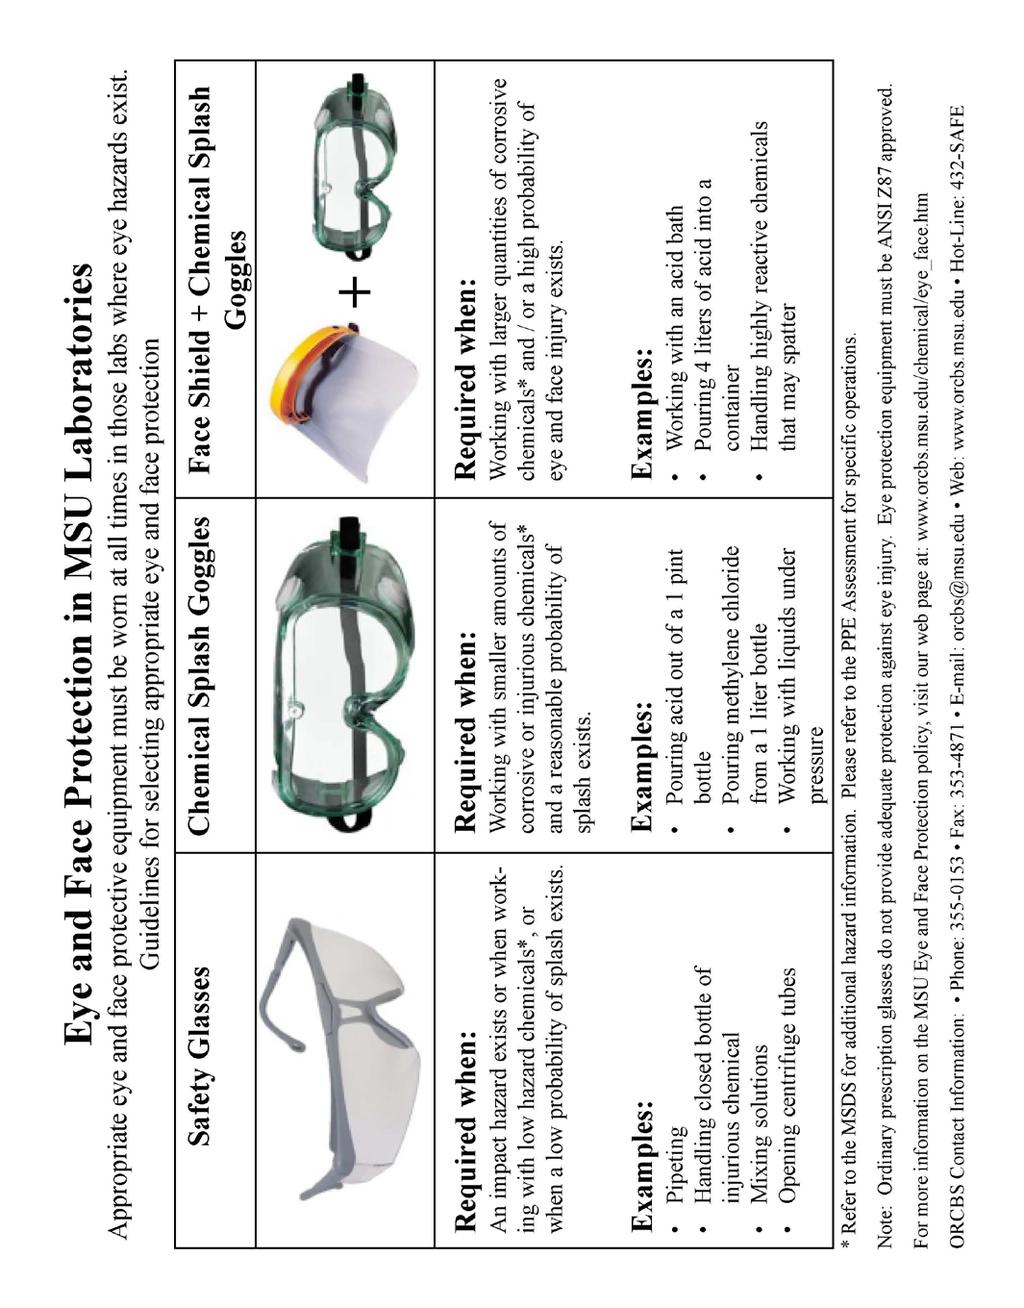 6.0 APPENDIX 1 Figure 1 Eye and Face Protection Recommendations for MSU Laboratories The